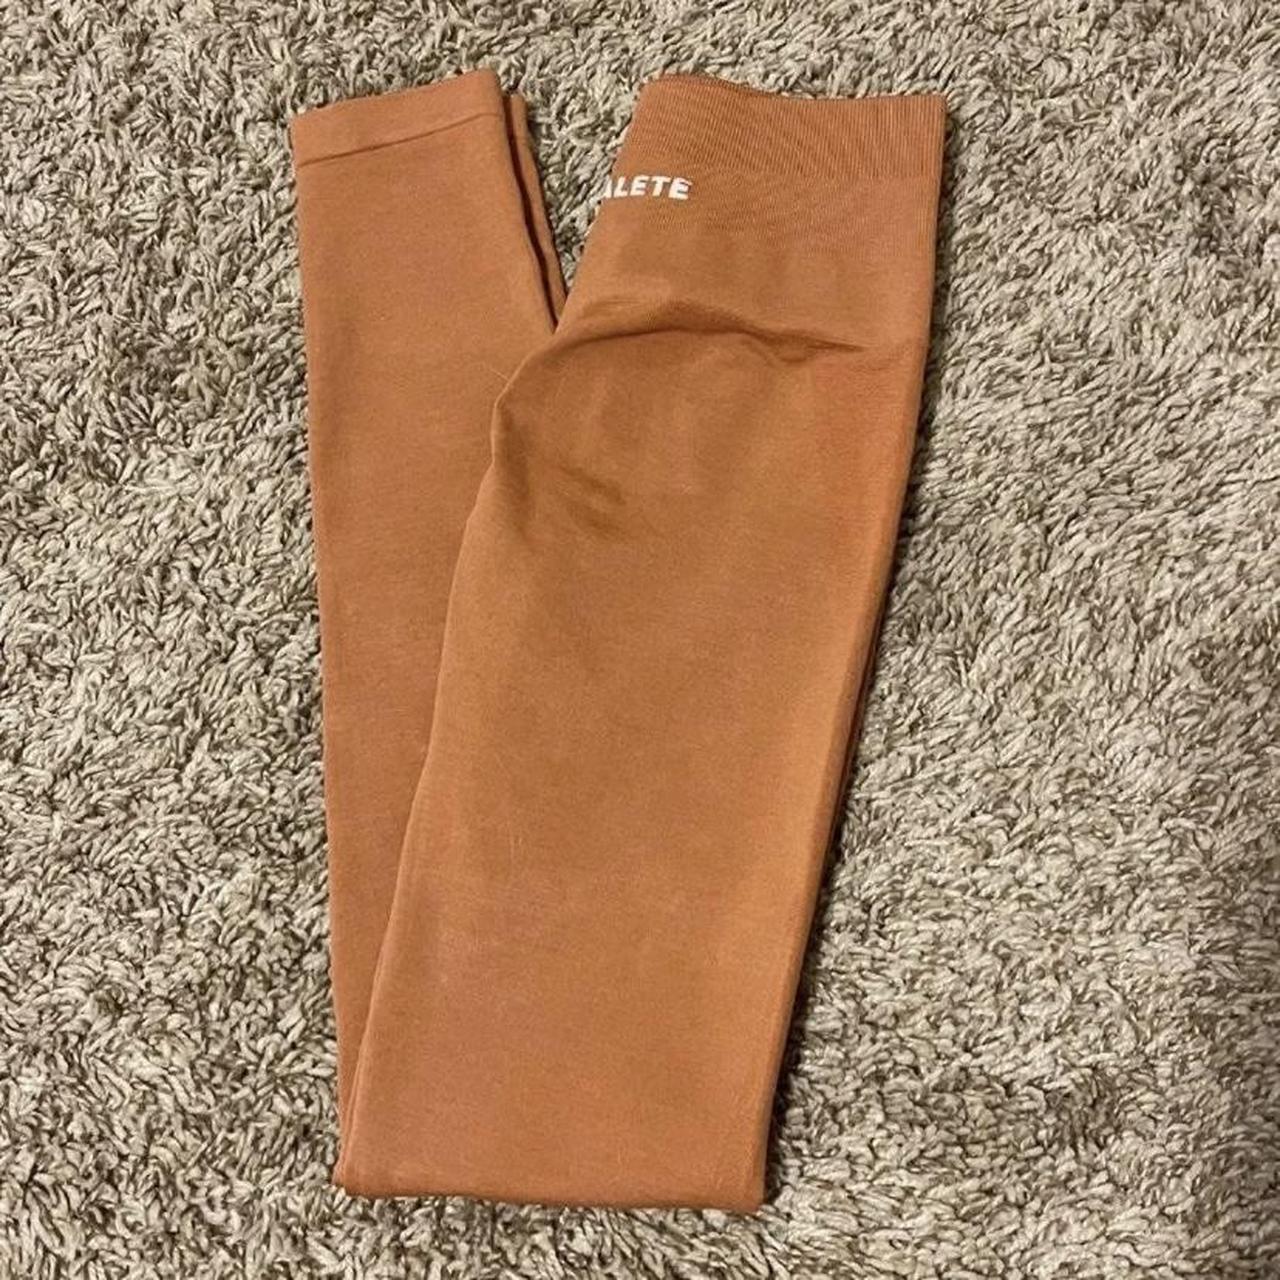 Alphalete Amplify Leggings In Chocolate Brown Size M - $75 - From Evelyn